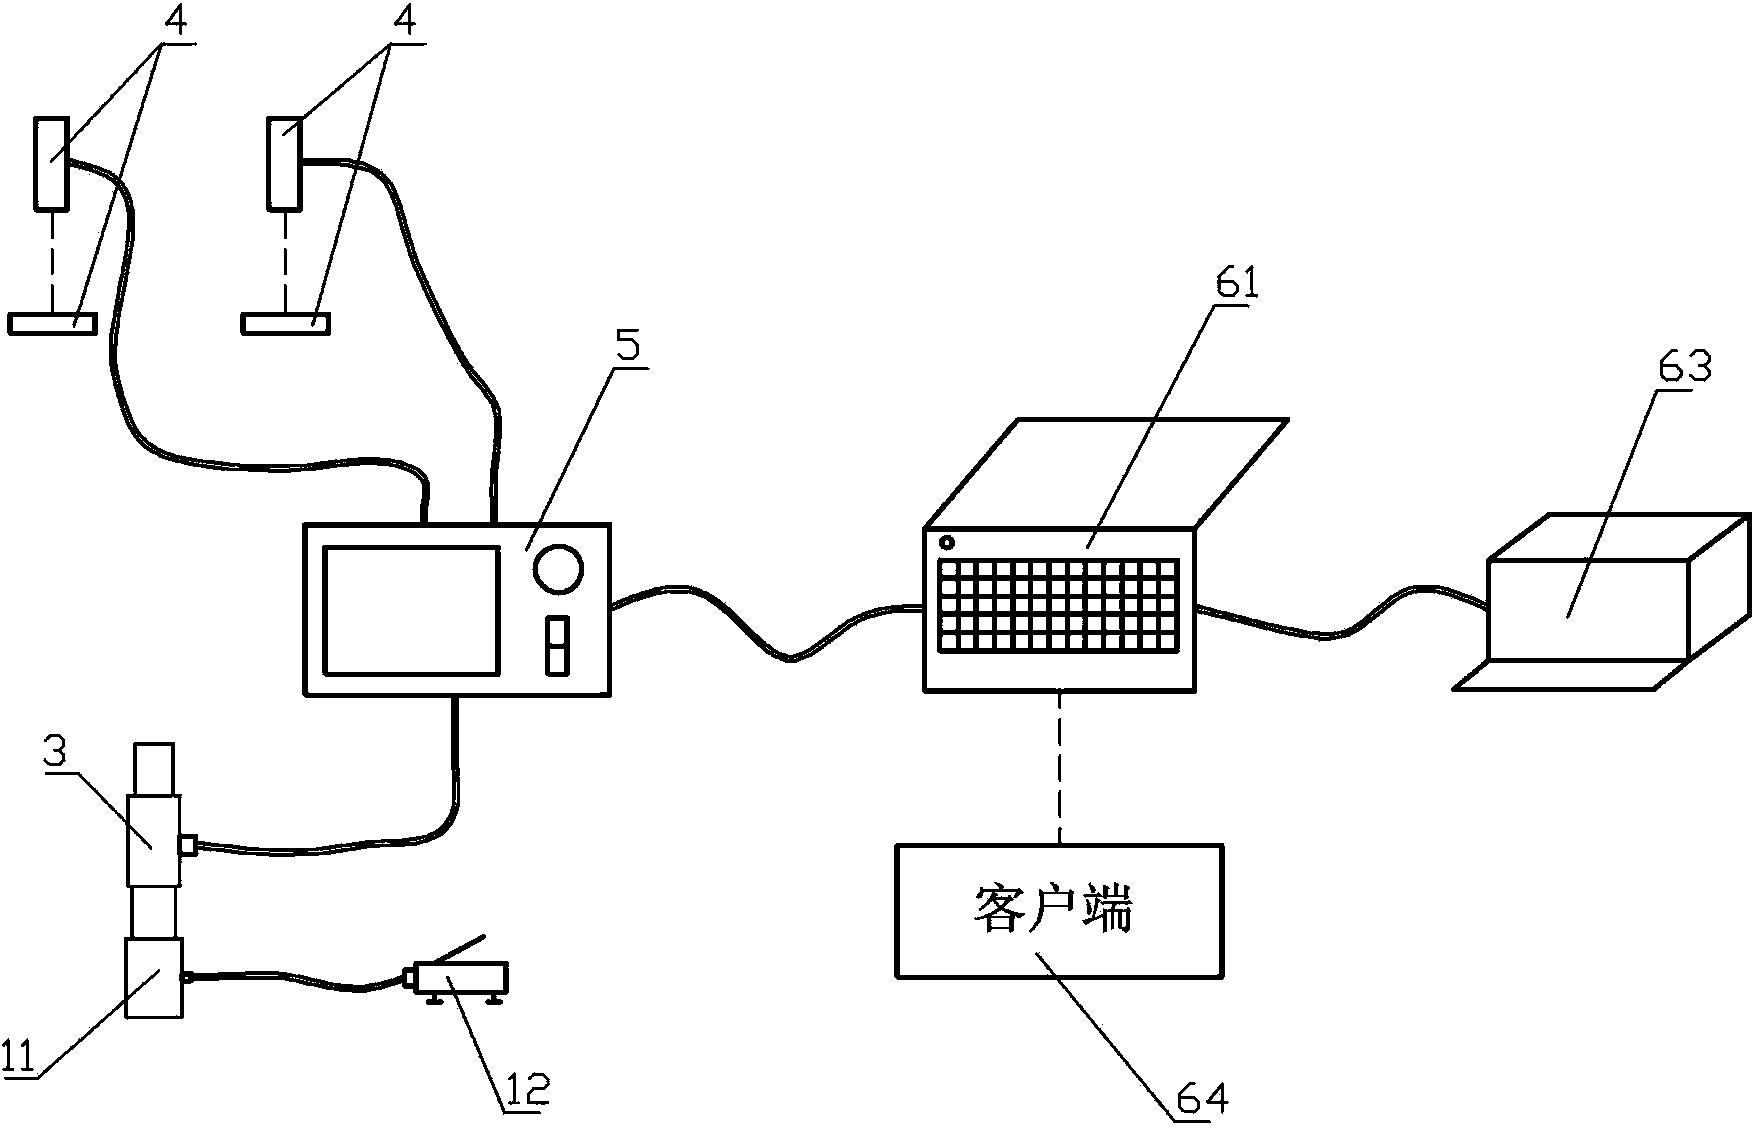 Railroad sleeper detection data acquisition device and system